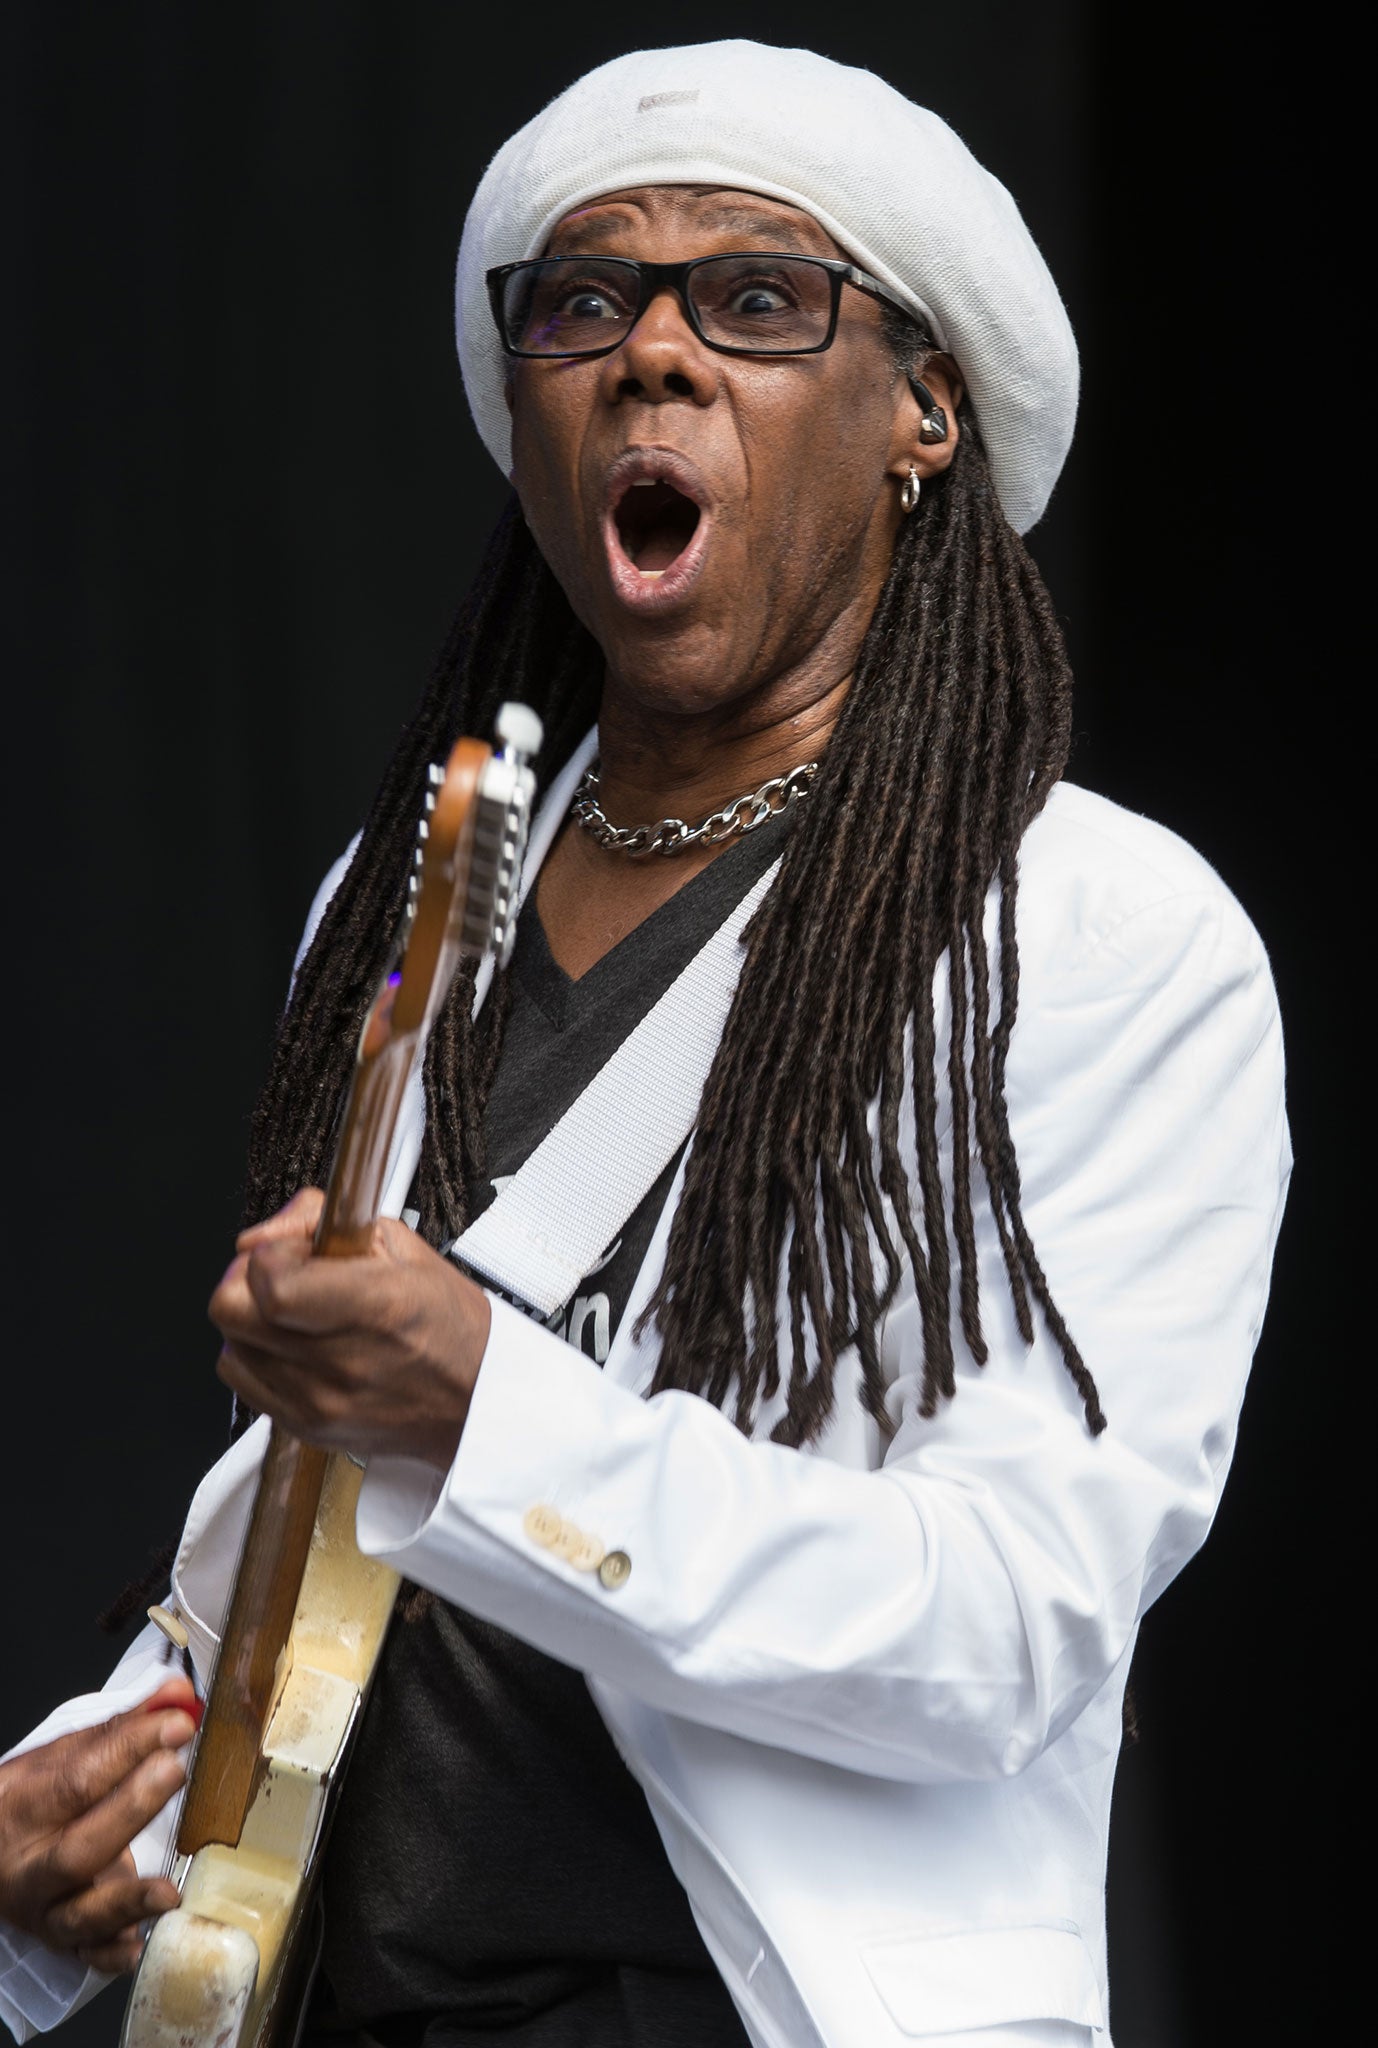 Nile Rodgers treated commuters to a solo set when he busked on the streets of London